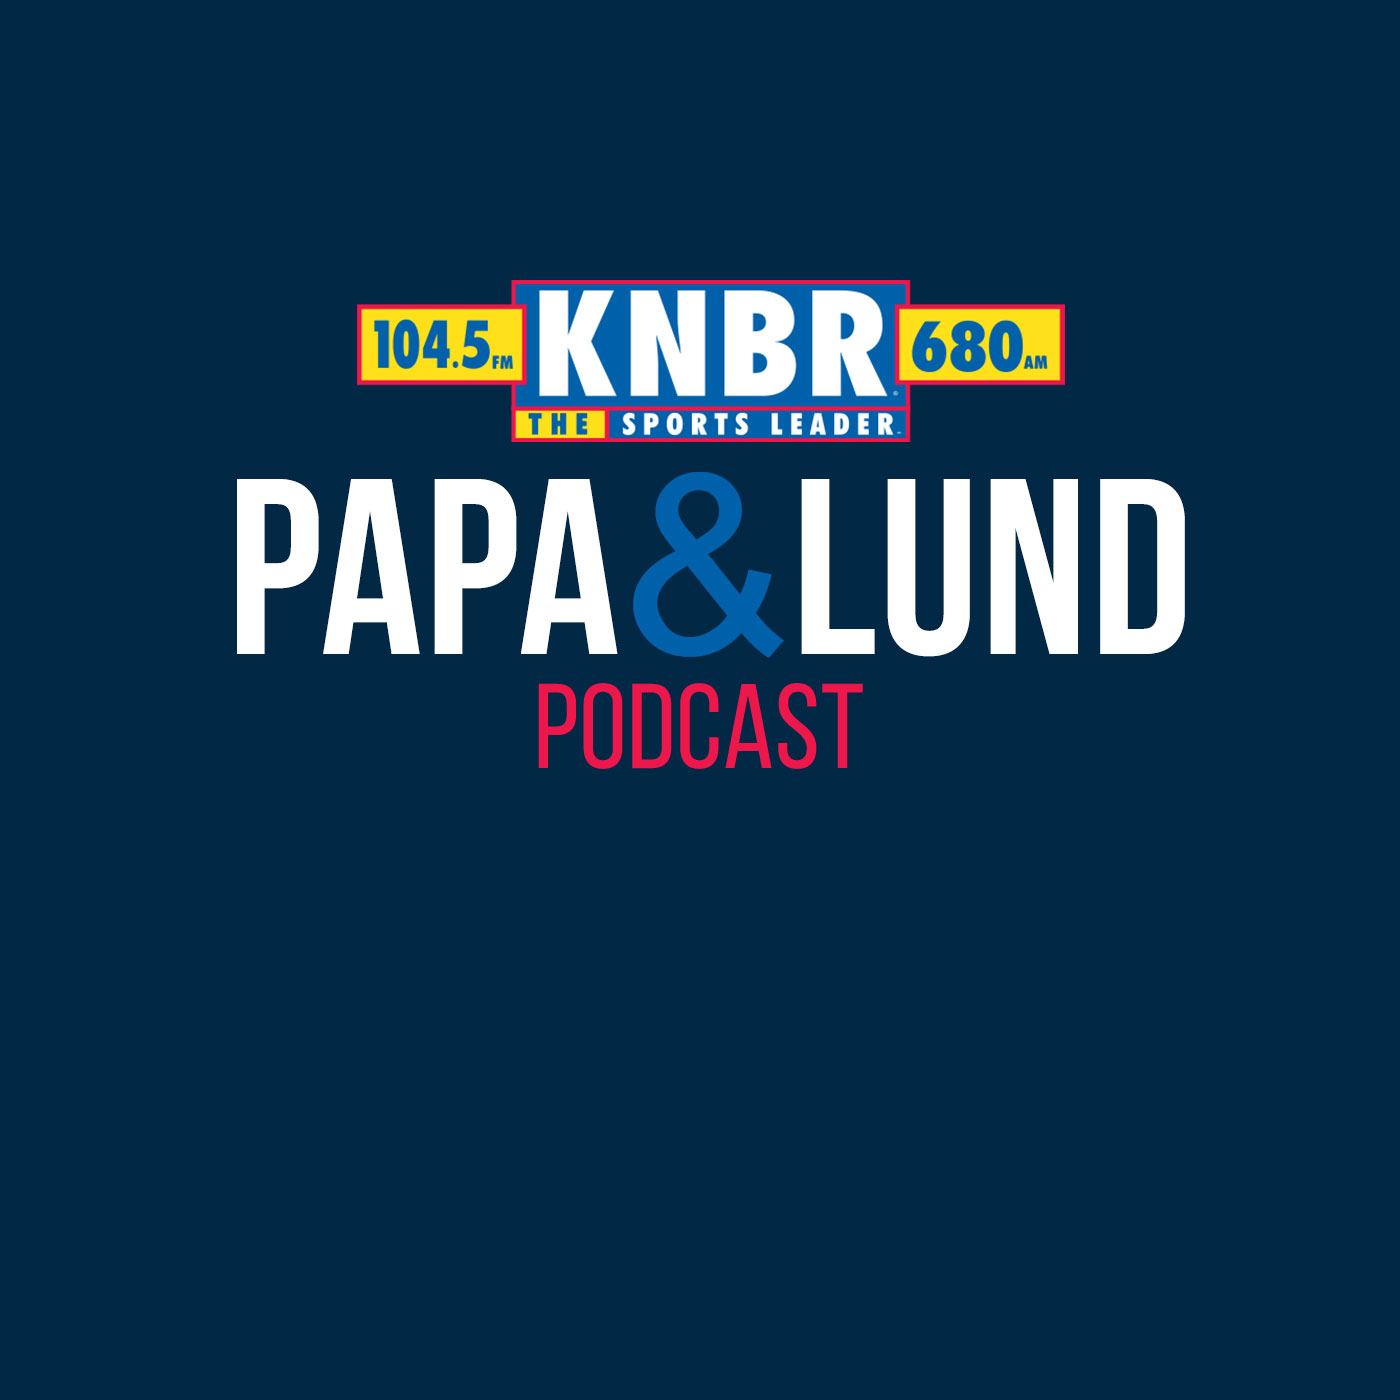 4-21 Hunter Pence joins Papa & Lund to talk some early Giants season, MadBum getting released, and promote his new Healthy Planet Project